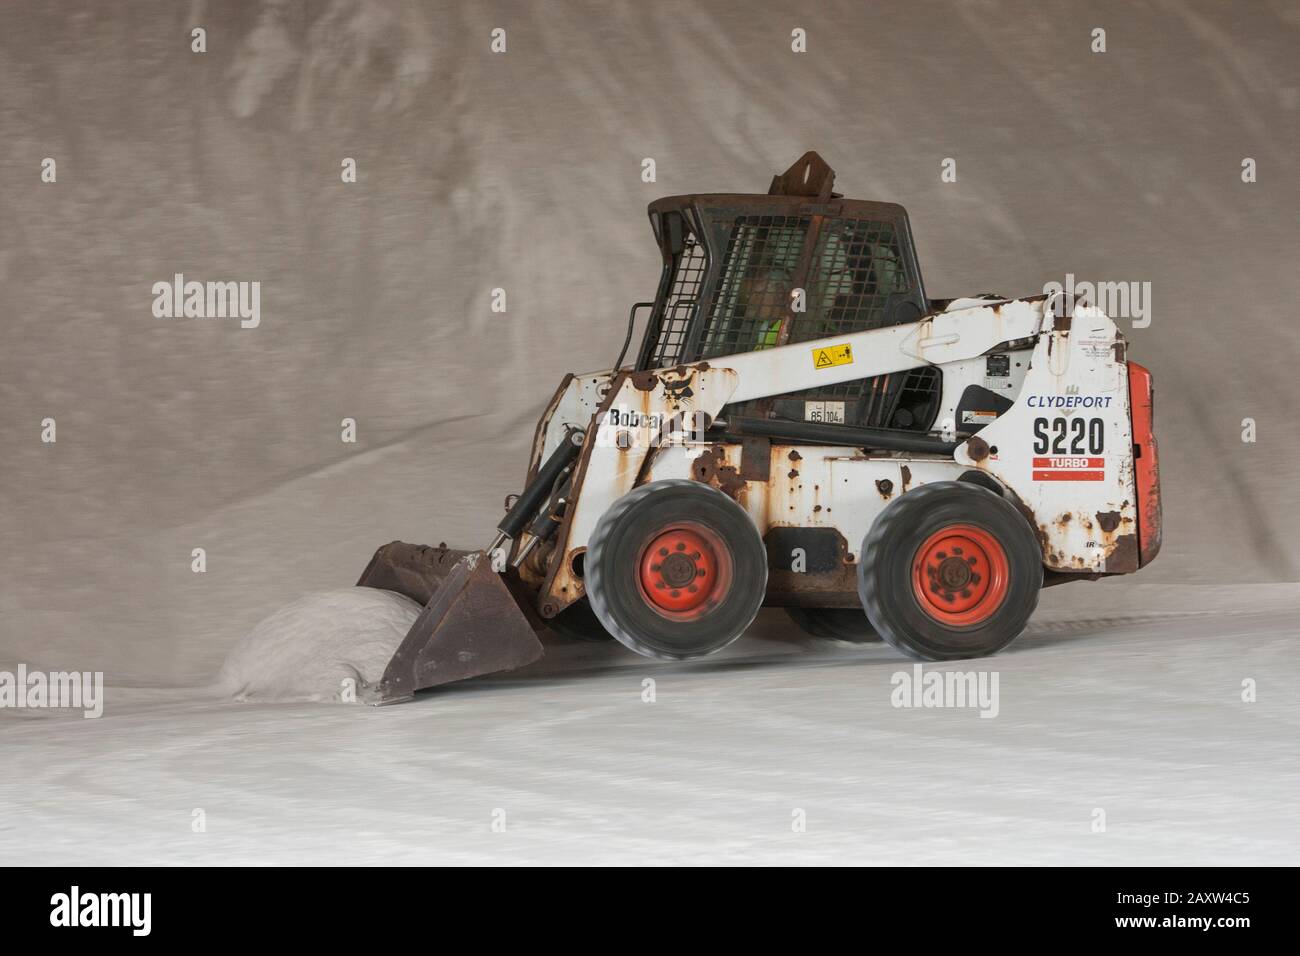 Bob cat small digger moving dry goods Stock Photo